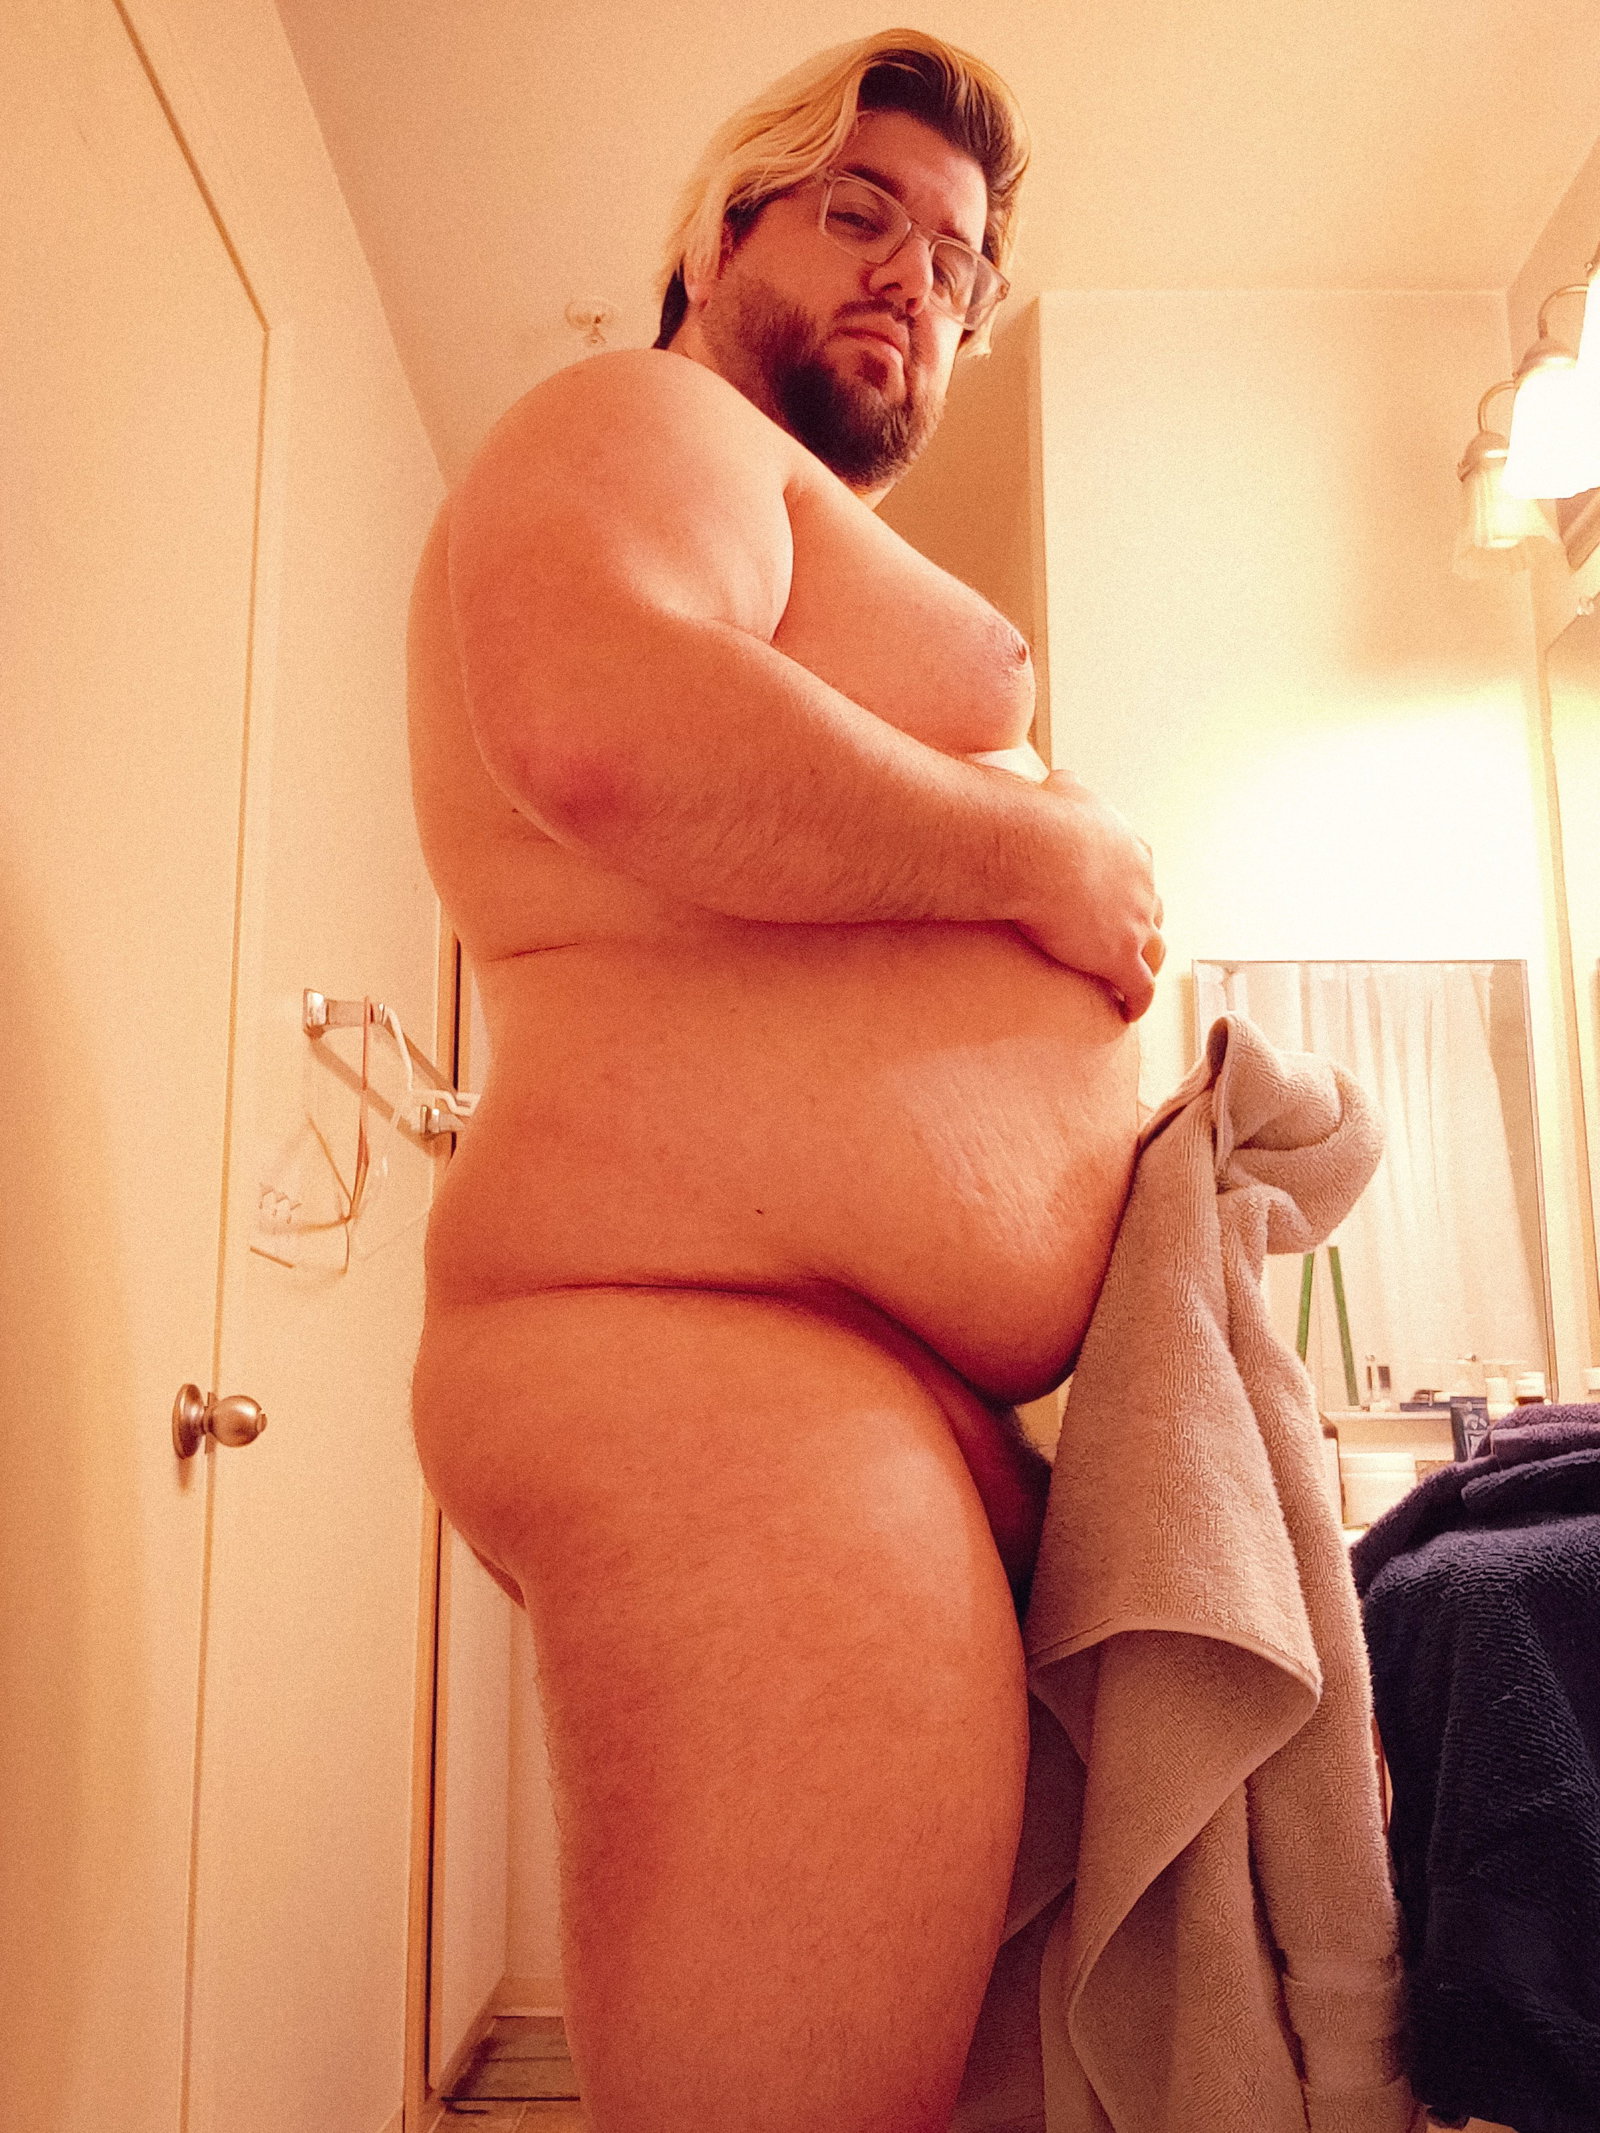 Watch the Photo by TheBearWannabe with the username @TheBearWannabe, who is a star user, posted on May 4, 2019. The post is about the topic Gay Bears. and the text says 'About to head in the shower, care to join me? :3'